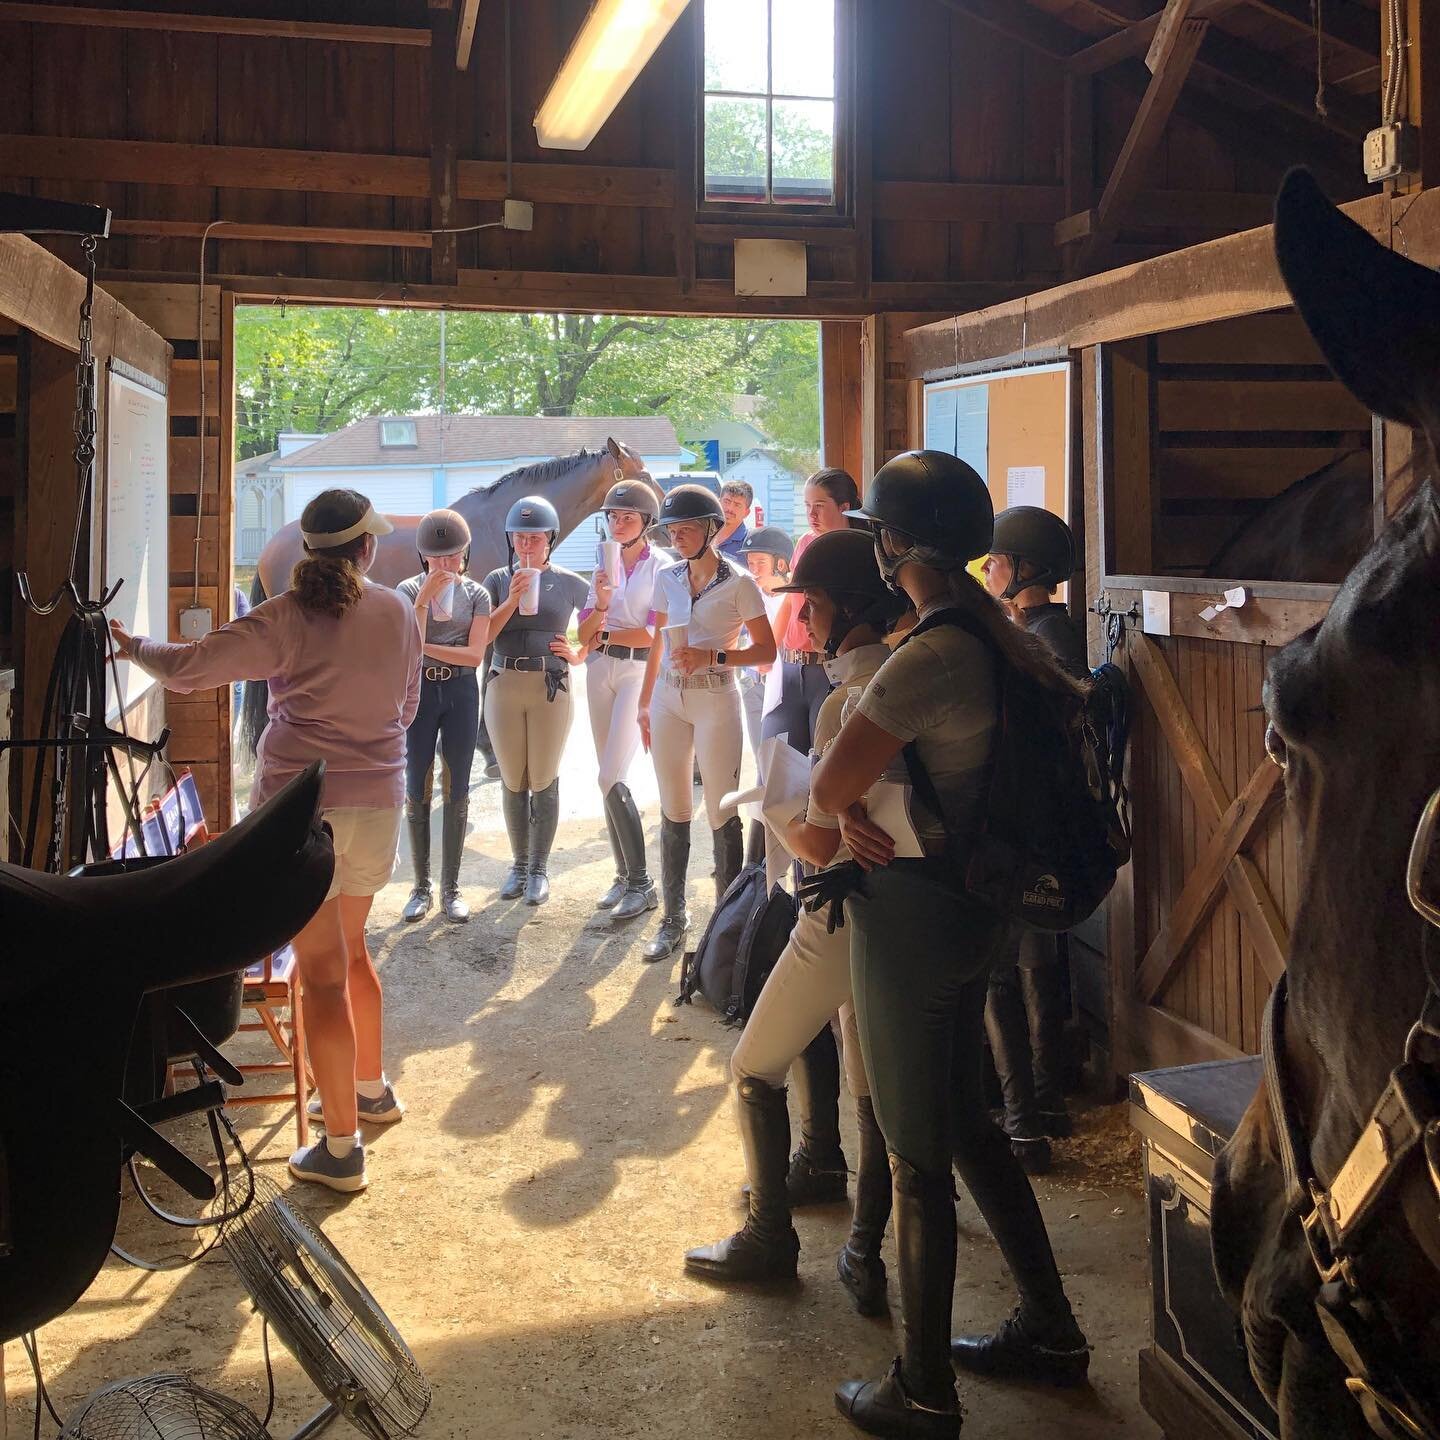 It&rsquo;s Gladstone Cup day💪🏻 Everyone is focused in on our game plan for our first day of the 2021 Adequan / USEF Junior Hunter National Championship - East Coast🏆 We&rsquo;re excited to be back at Brandywine this week!⭐️